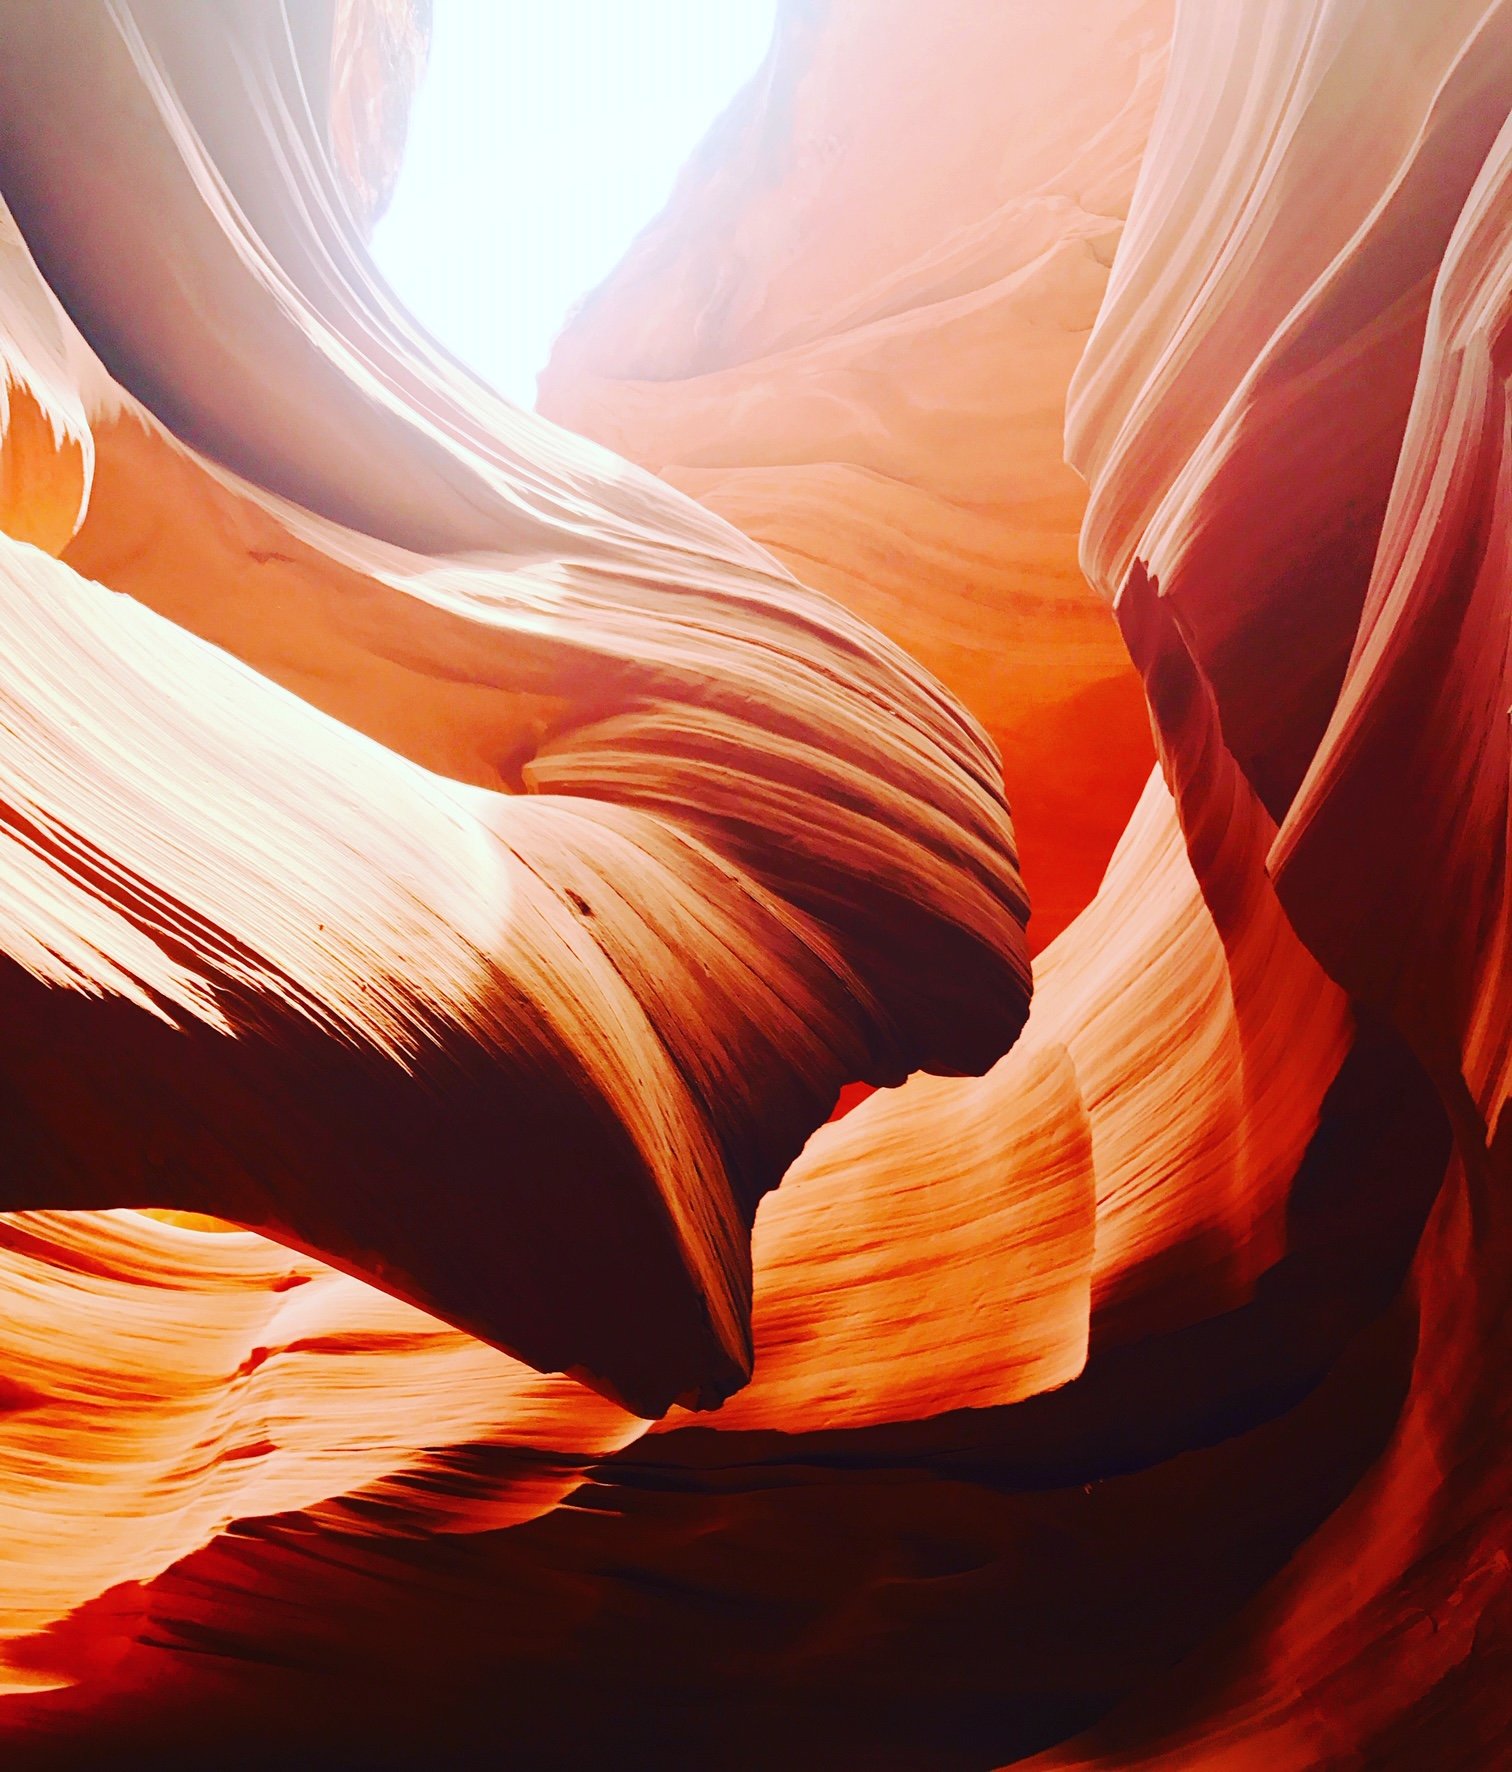 Why You Should Visit Lower Antelope Canyon